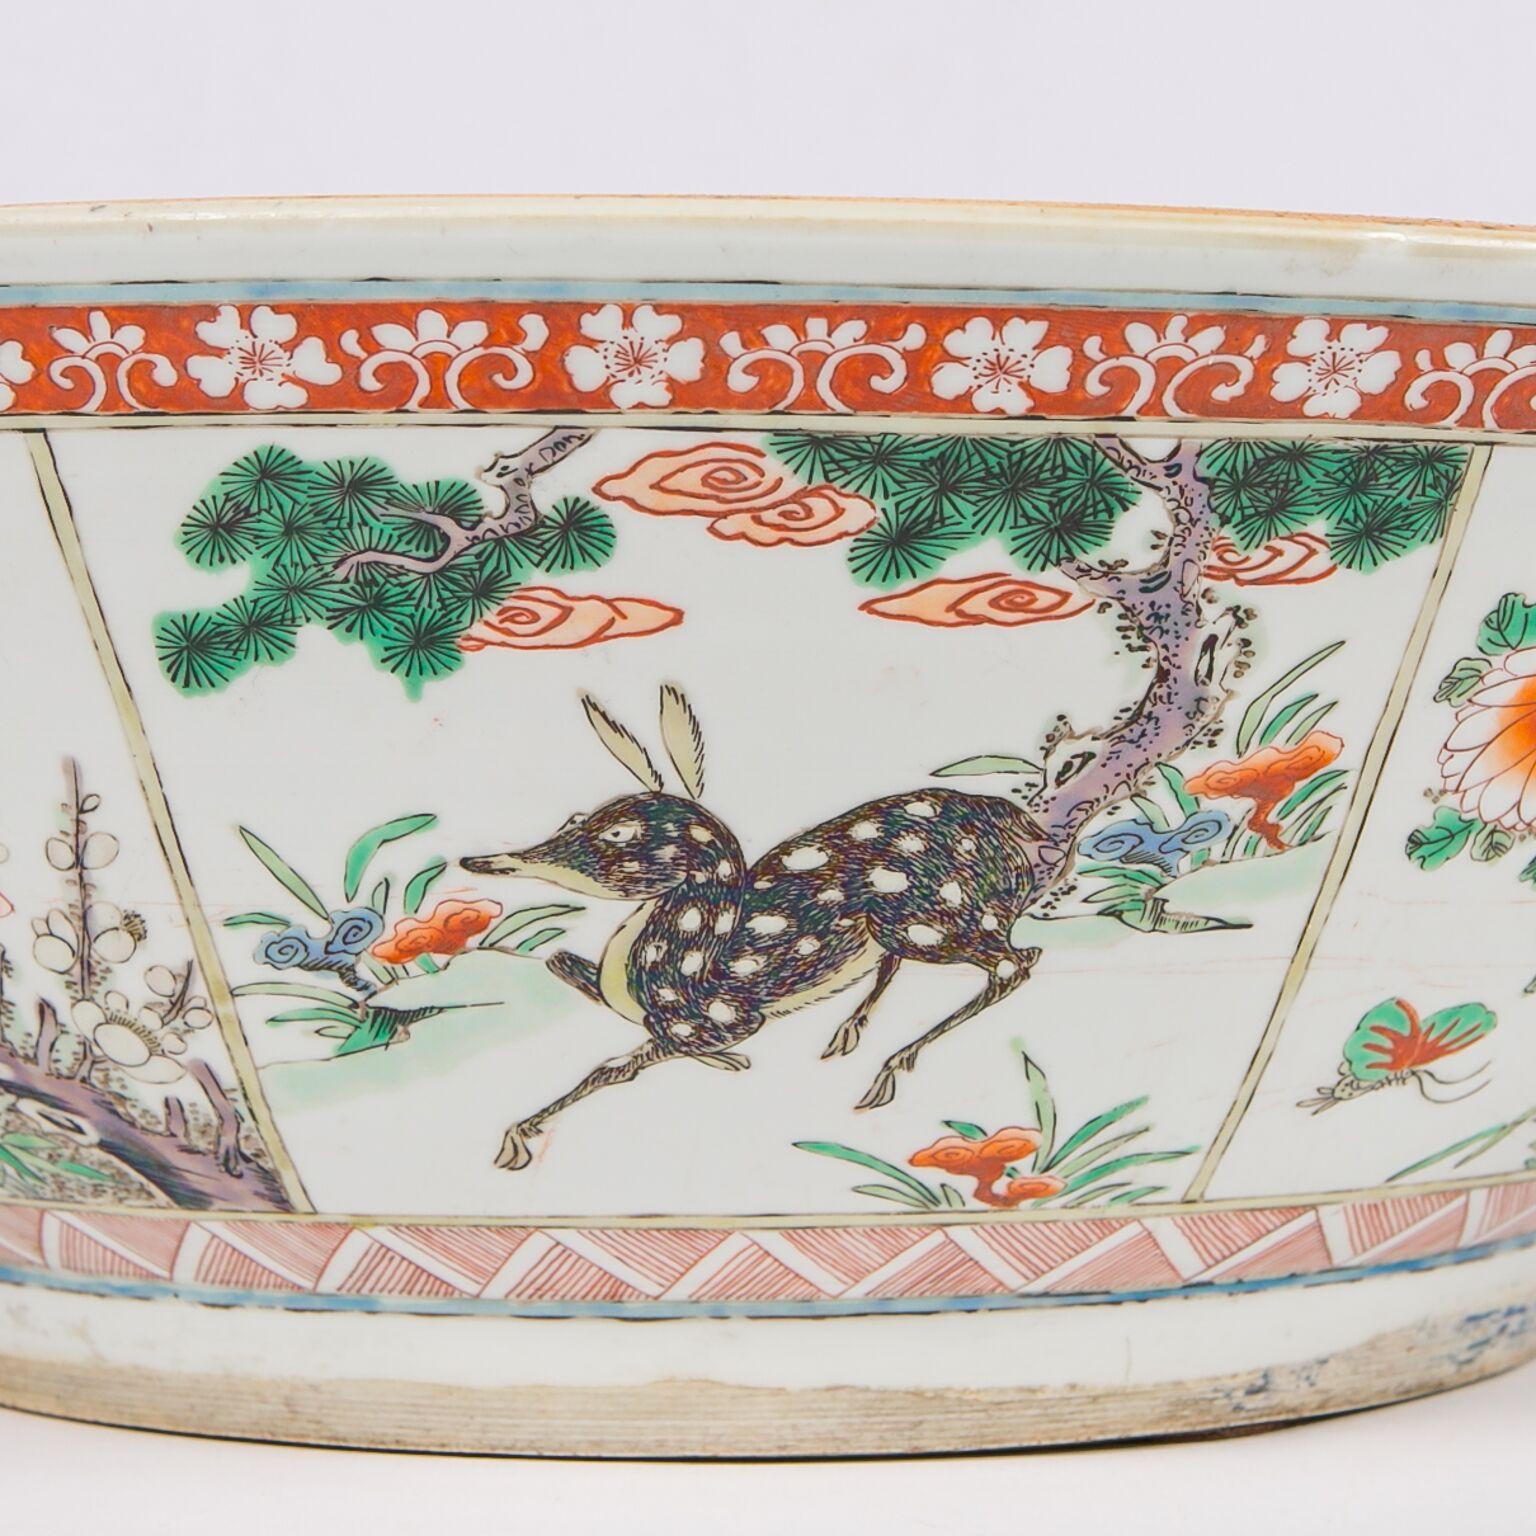 Hand-Painted Large Antique Chinese Bowl Decorated in Famille Verte Enamels, Circa 1900